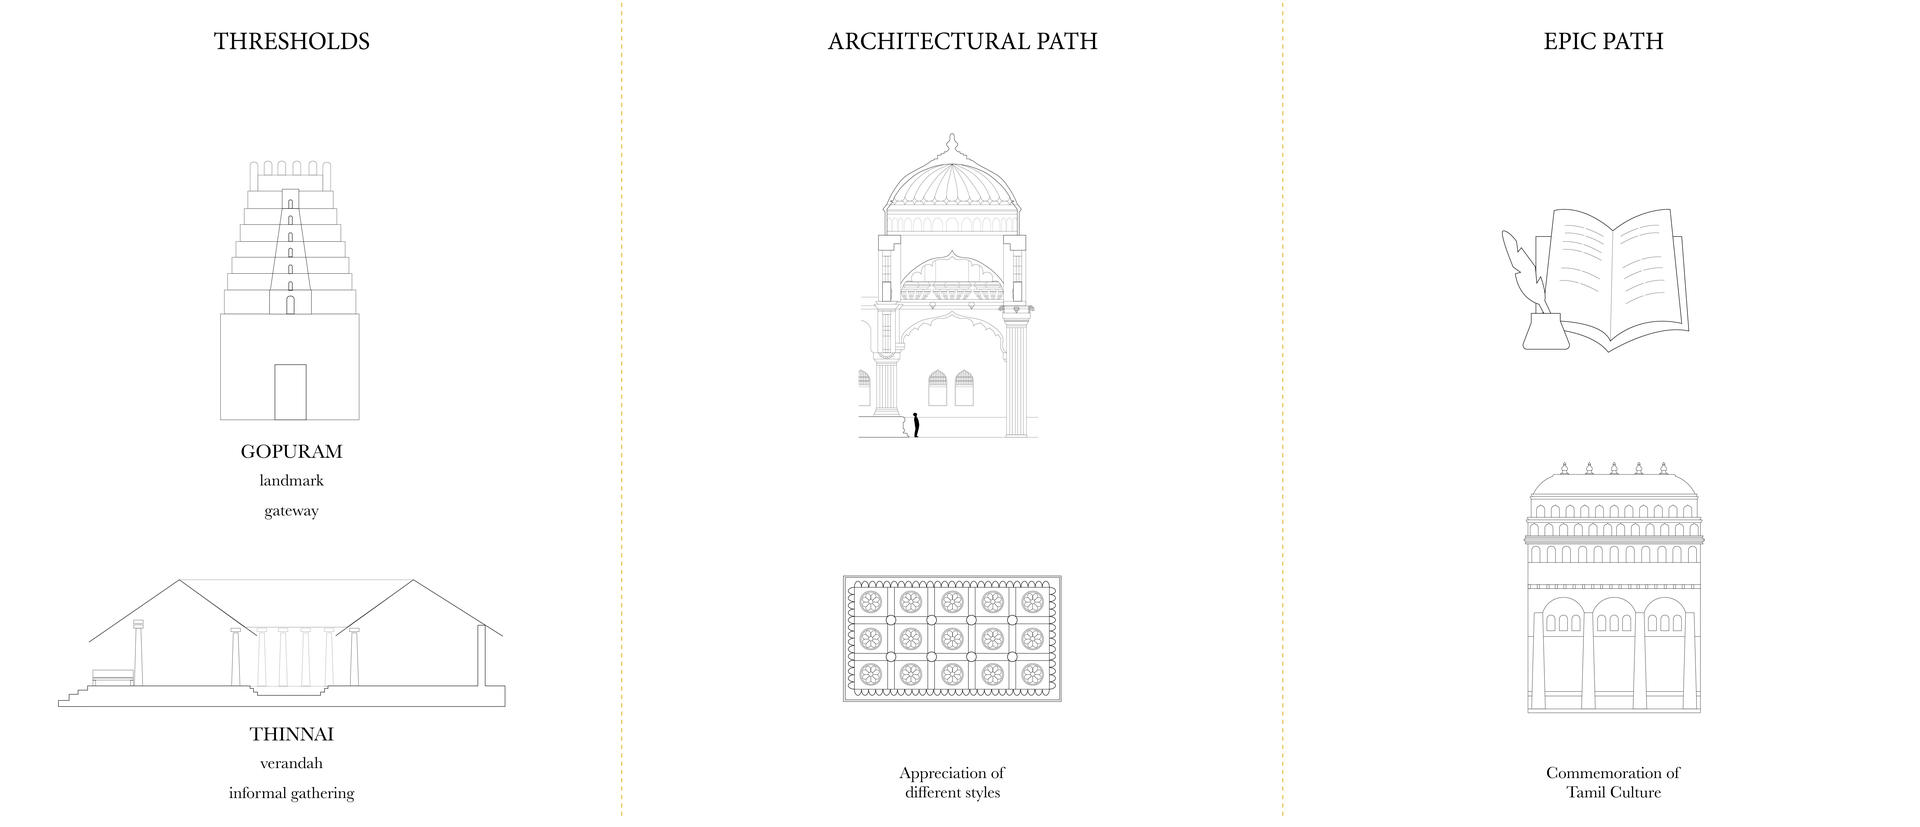 The path through the new design is divided into three programmatic divisions - Thresholds, Architectural Path and Epic Path.